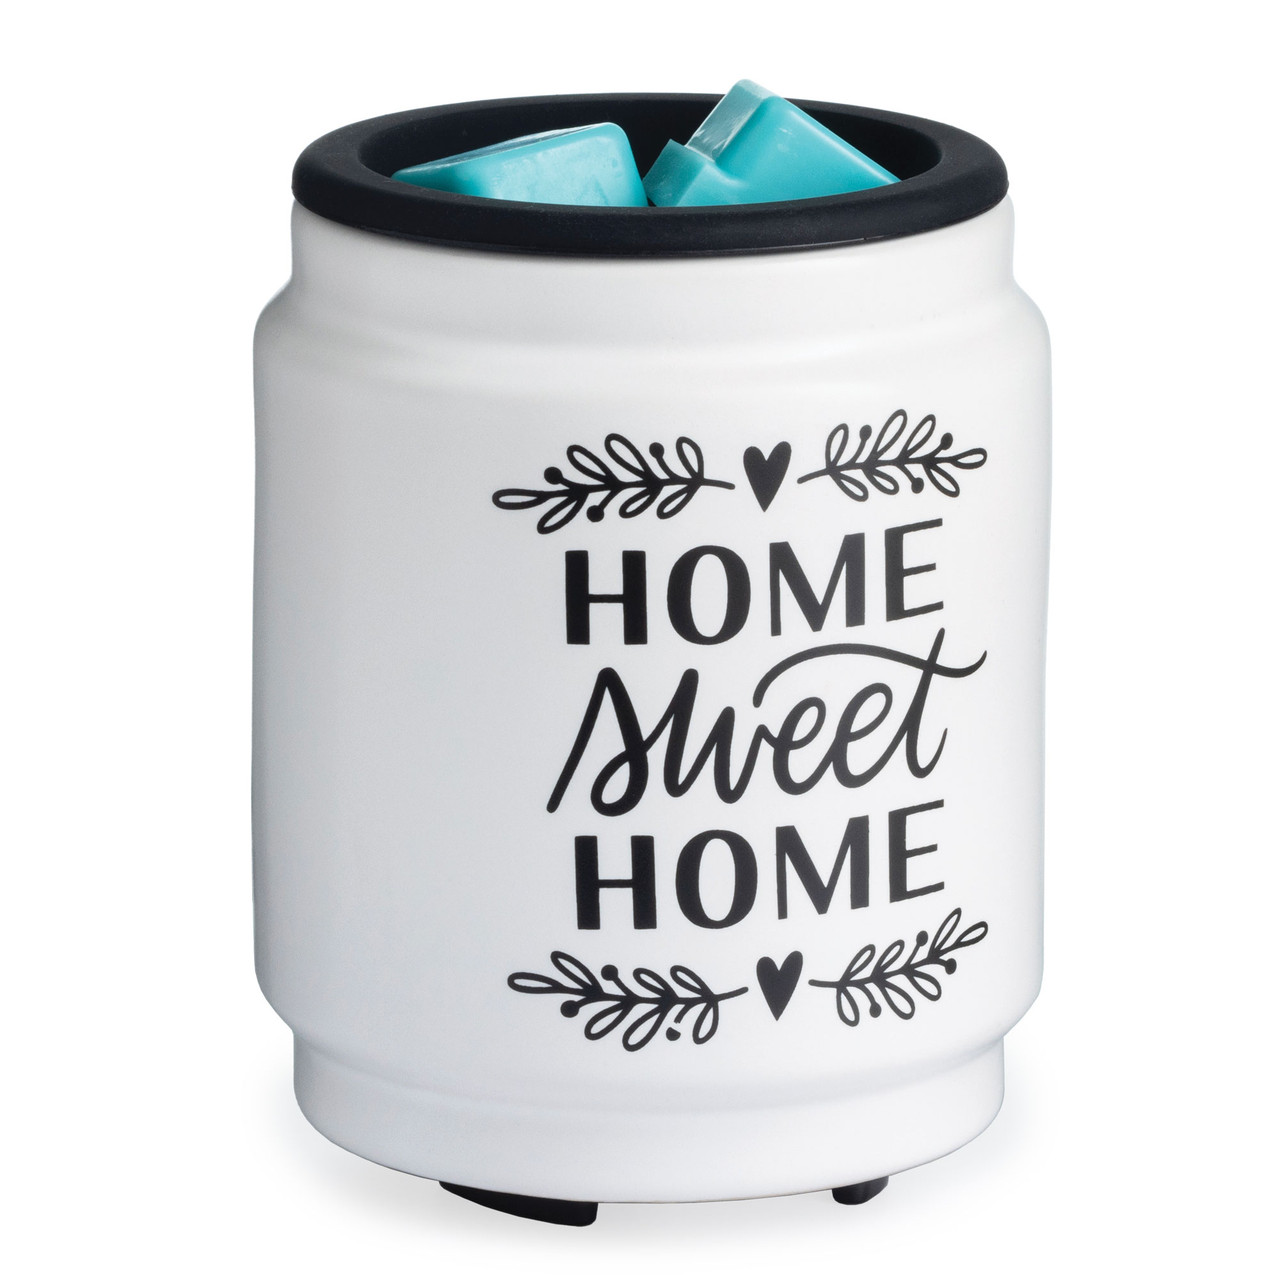 Home Sweet Home Wax Melt Warmer Gift Set in Colorado Springs, CO